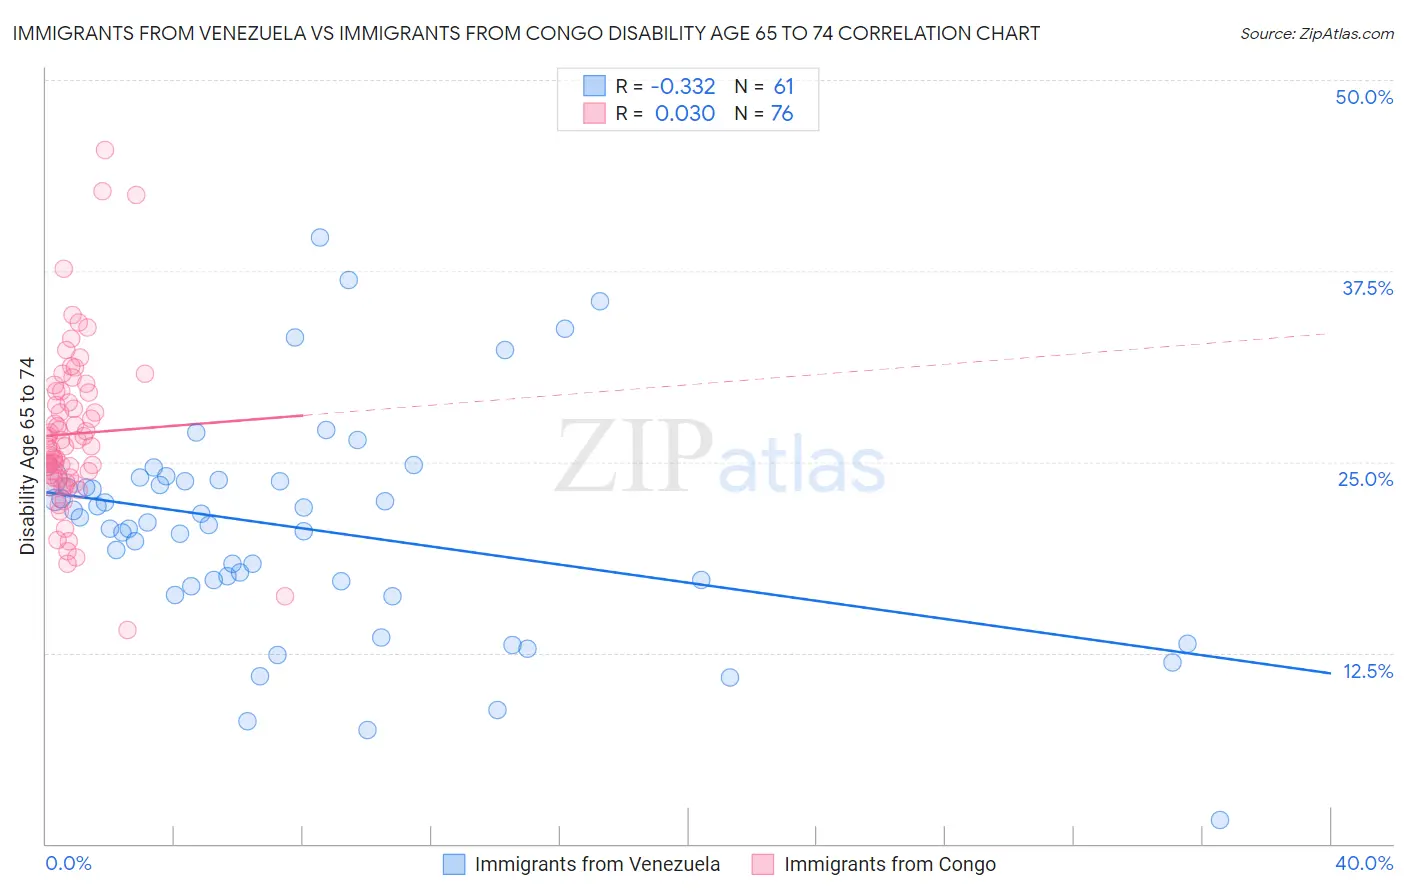 Immigrants from Venezuela vs Immigrants from Congo Disability Age 65 to 74